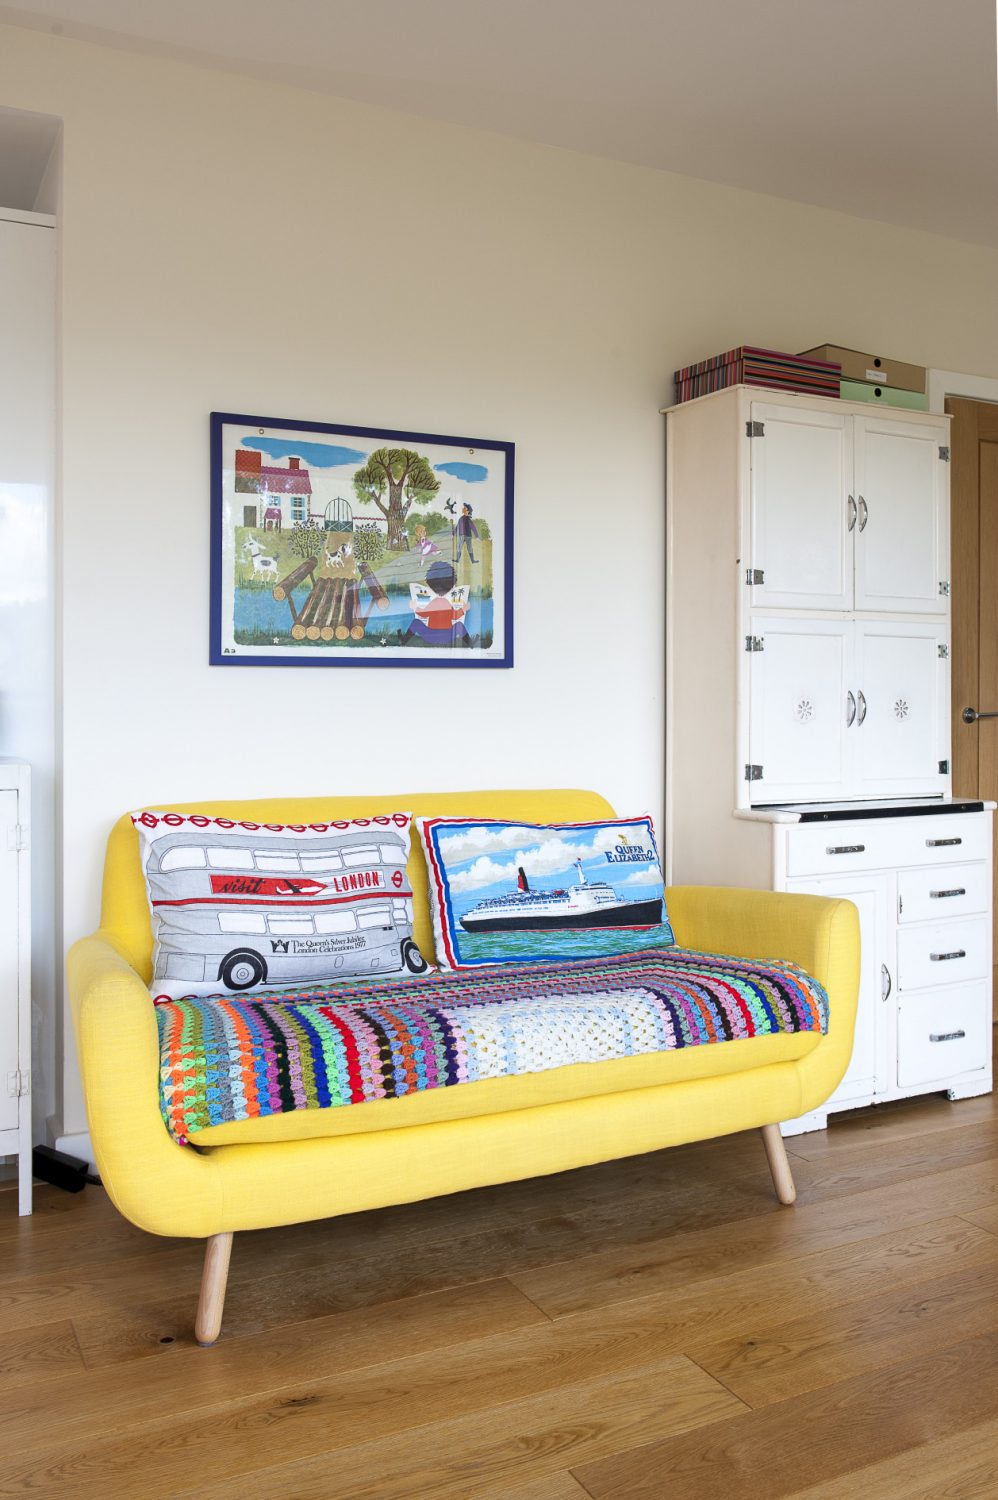 The pretty 60s-style sofa is from Made.com and above it hangs a 1960s French schoolroom poster